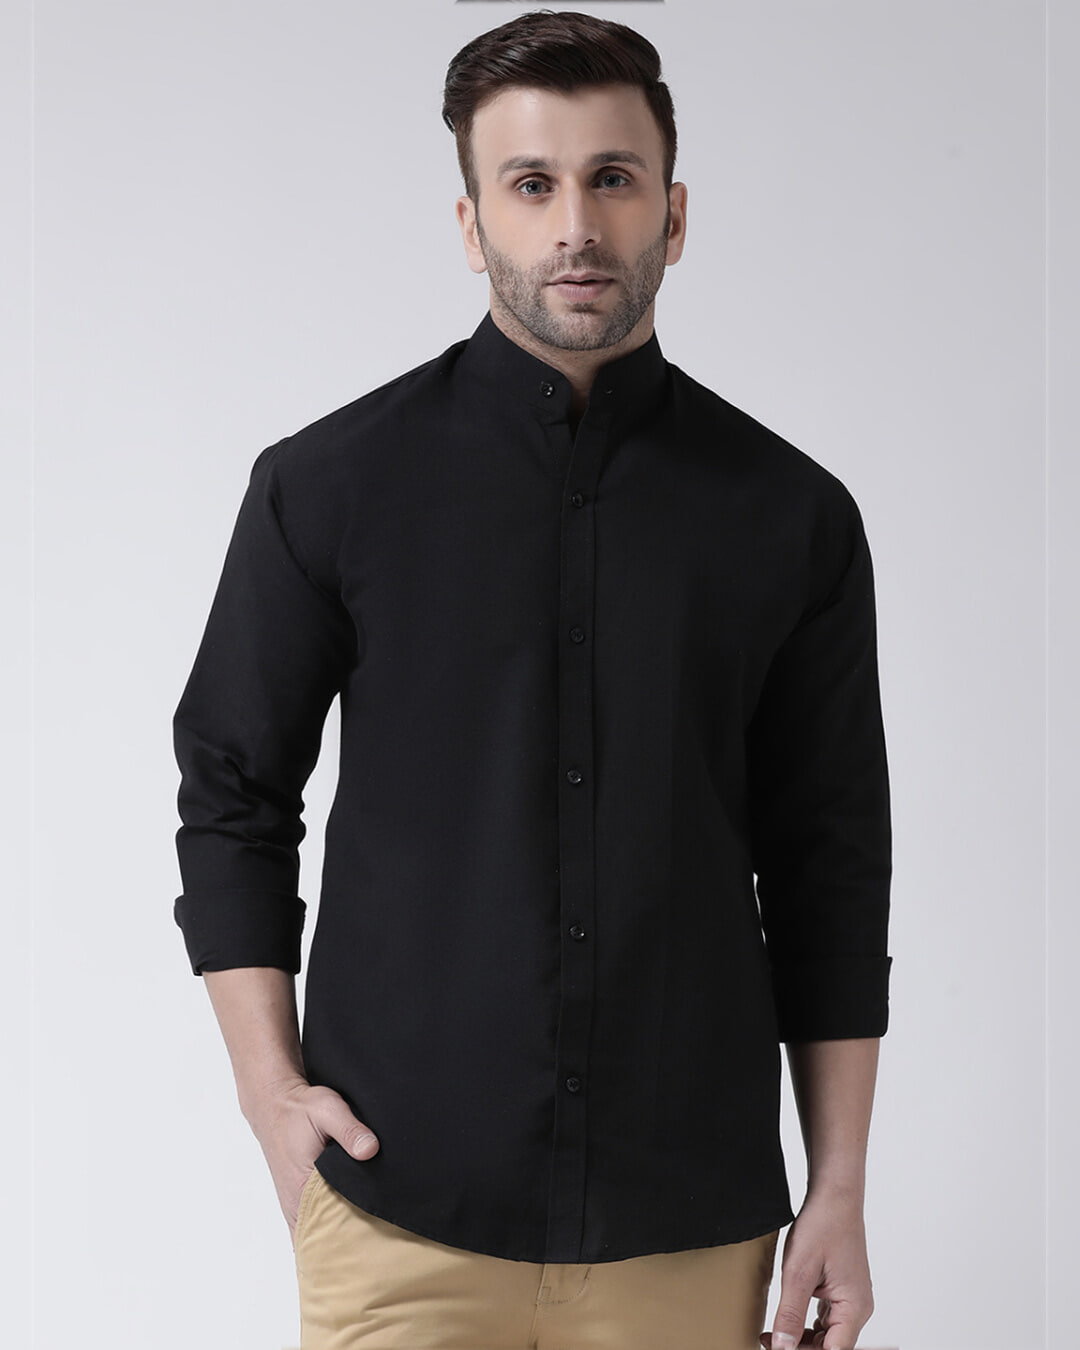 Buy Riag Full Sleeves Cotton Casual Chinese Neck Shirt Online at Bewakoof